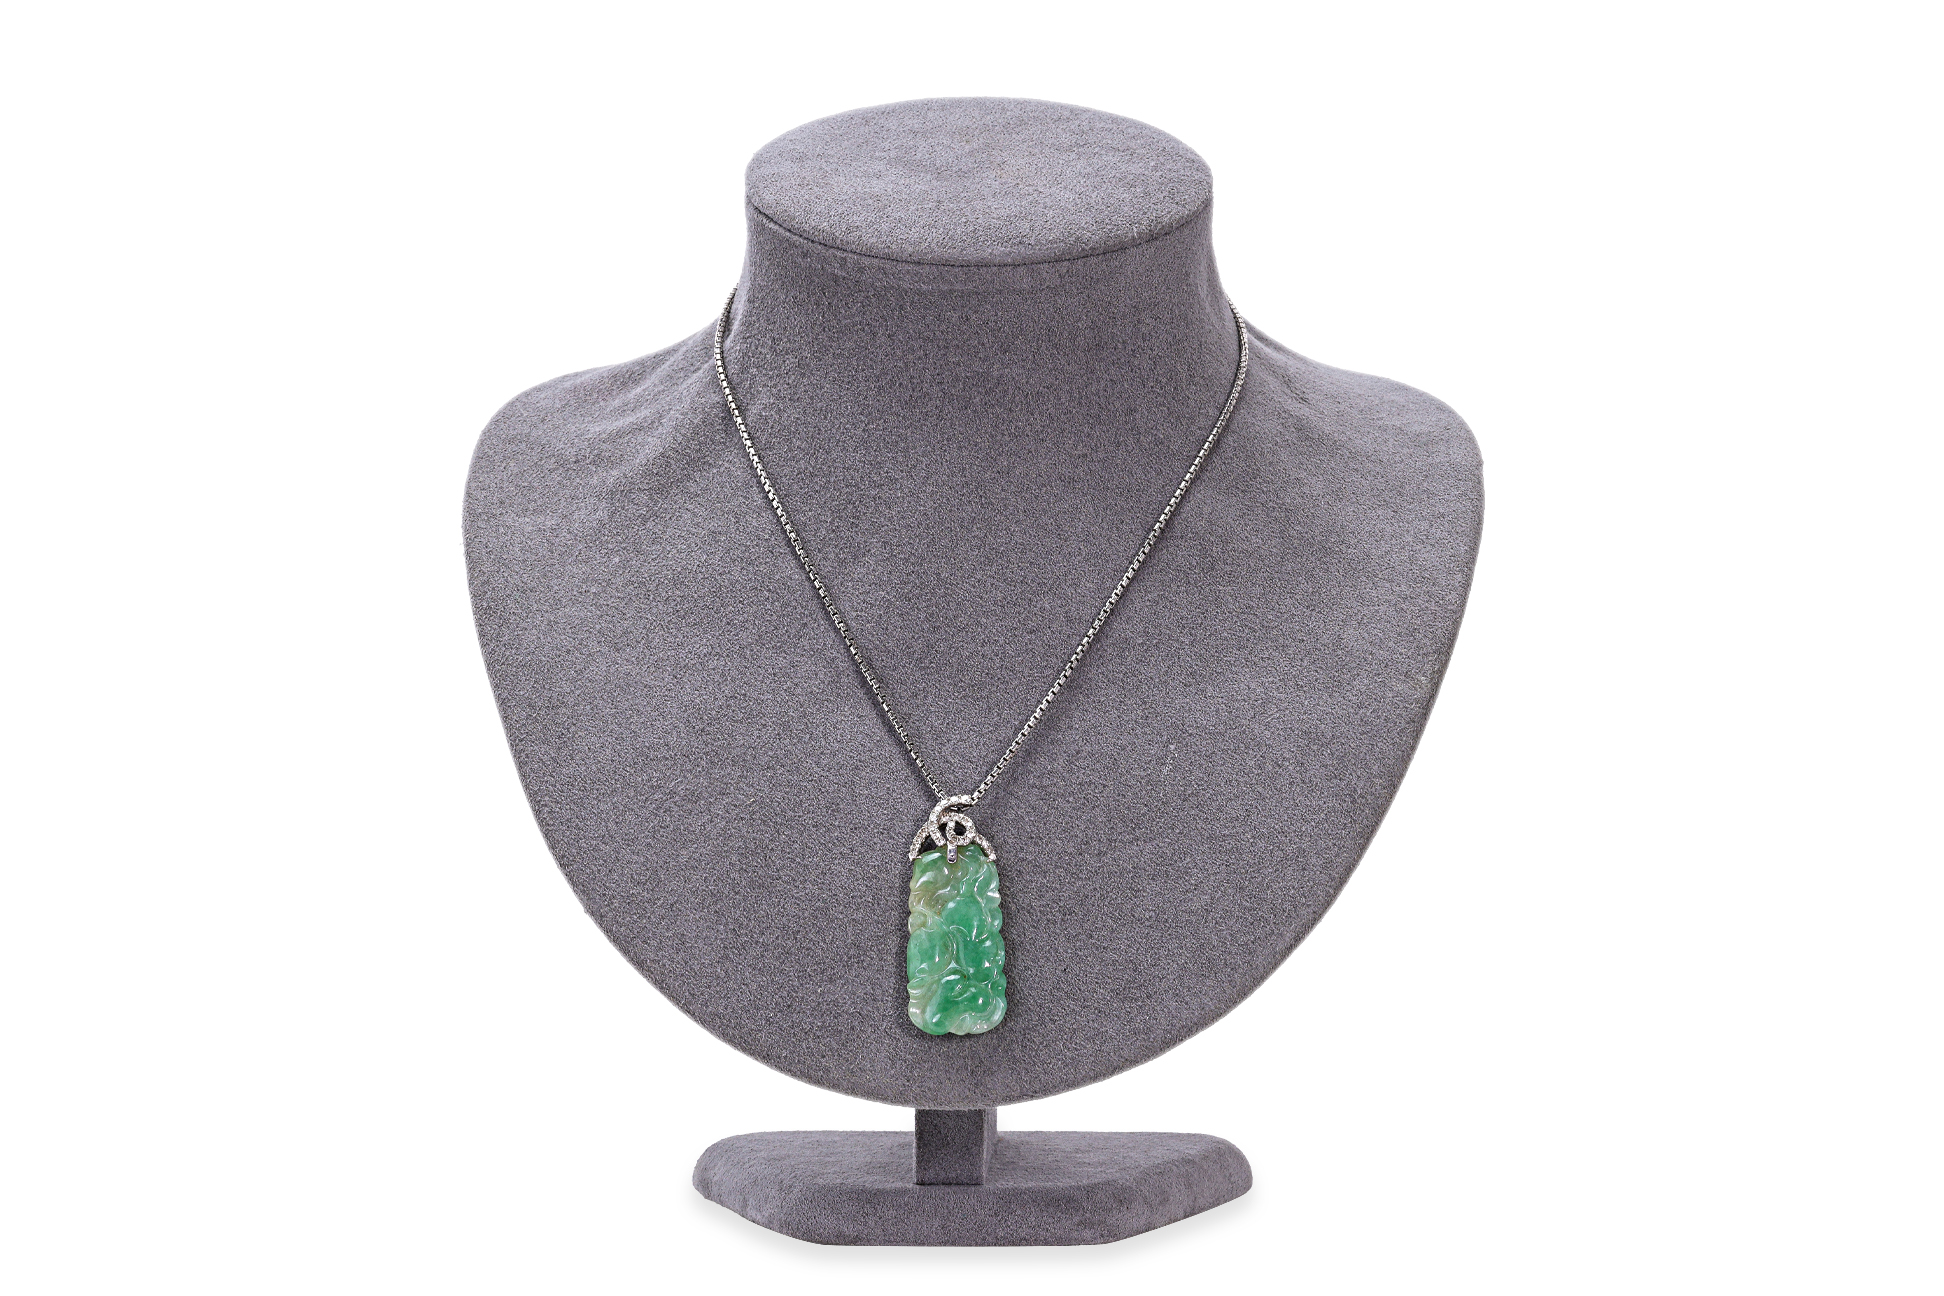 A TYPE A 'MELON' JADEITE AND DIAMOND PENDANT ON A CHAIN - Image 3 of 4